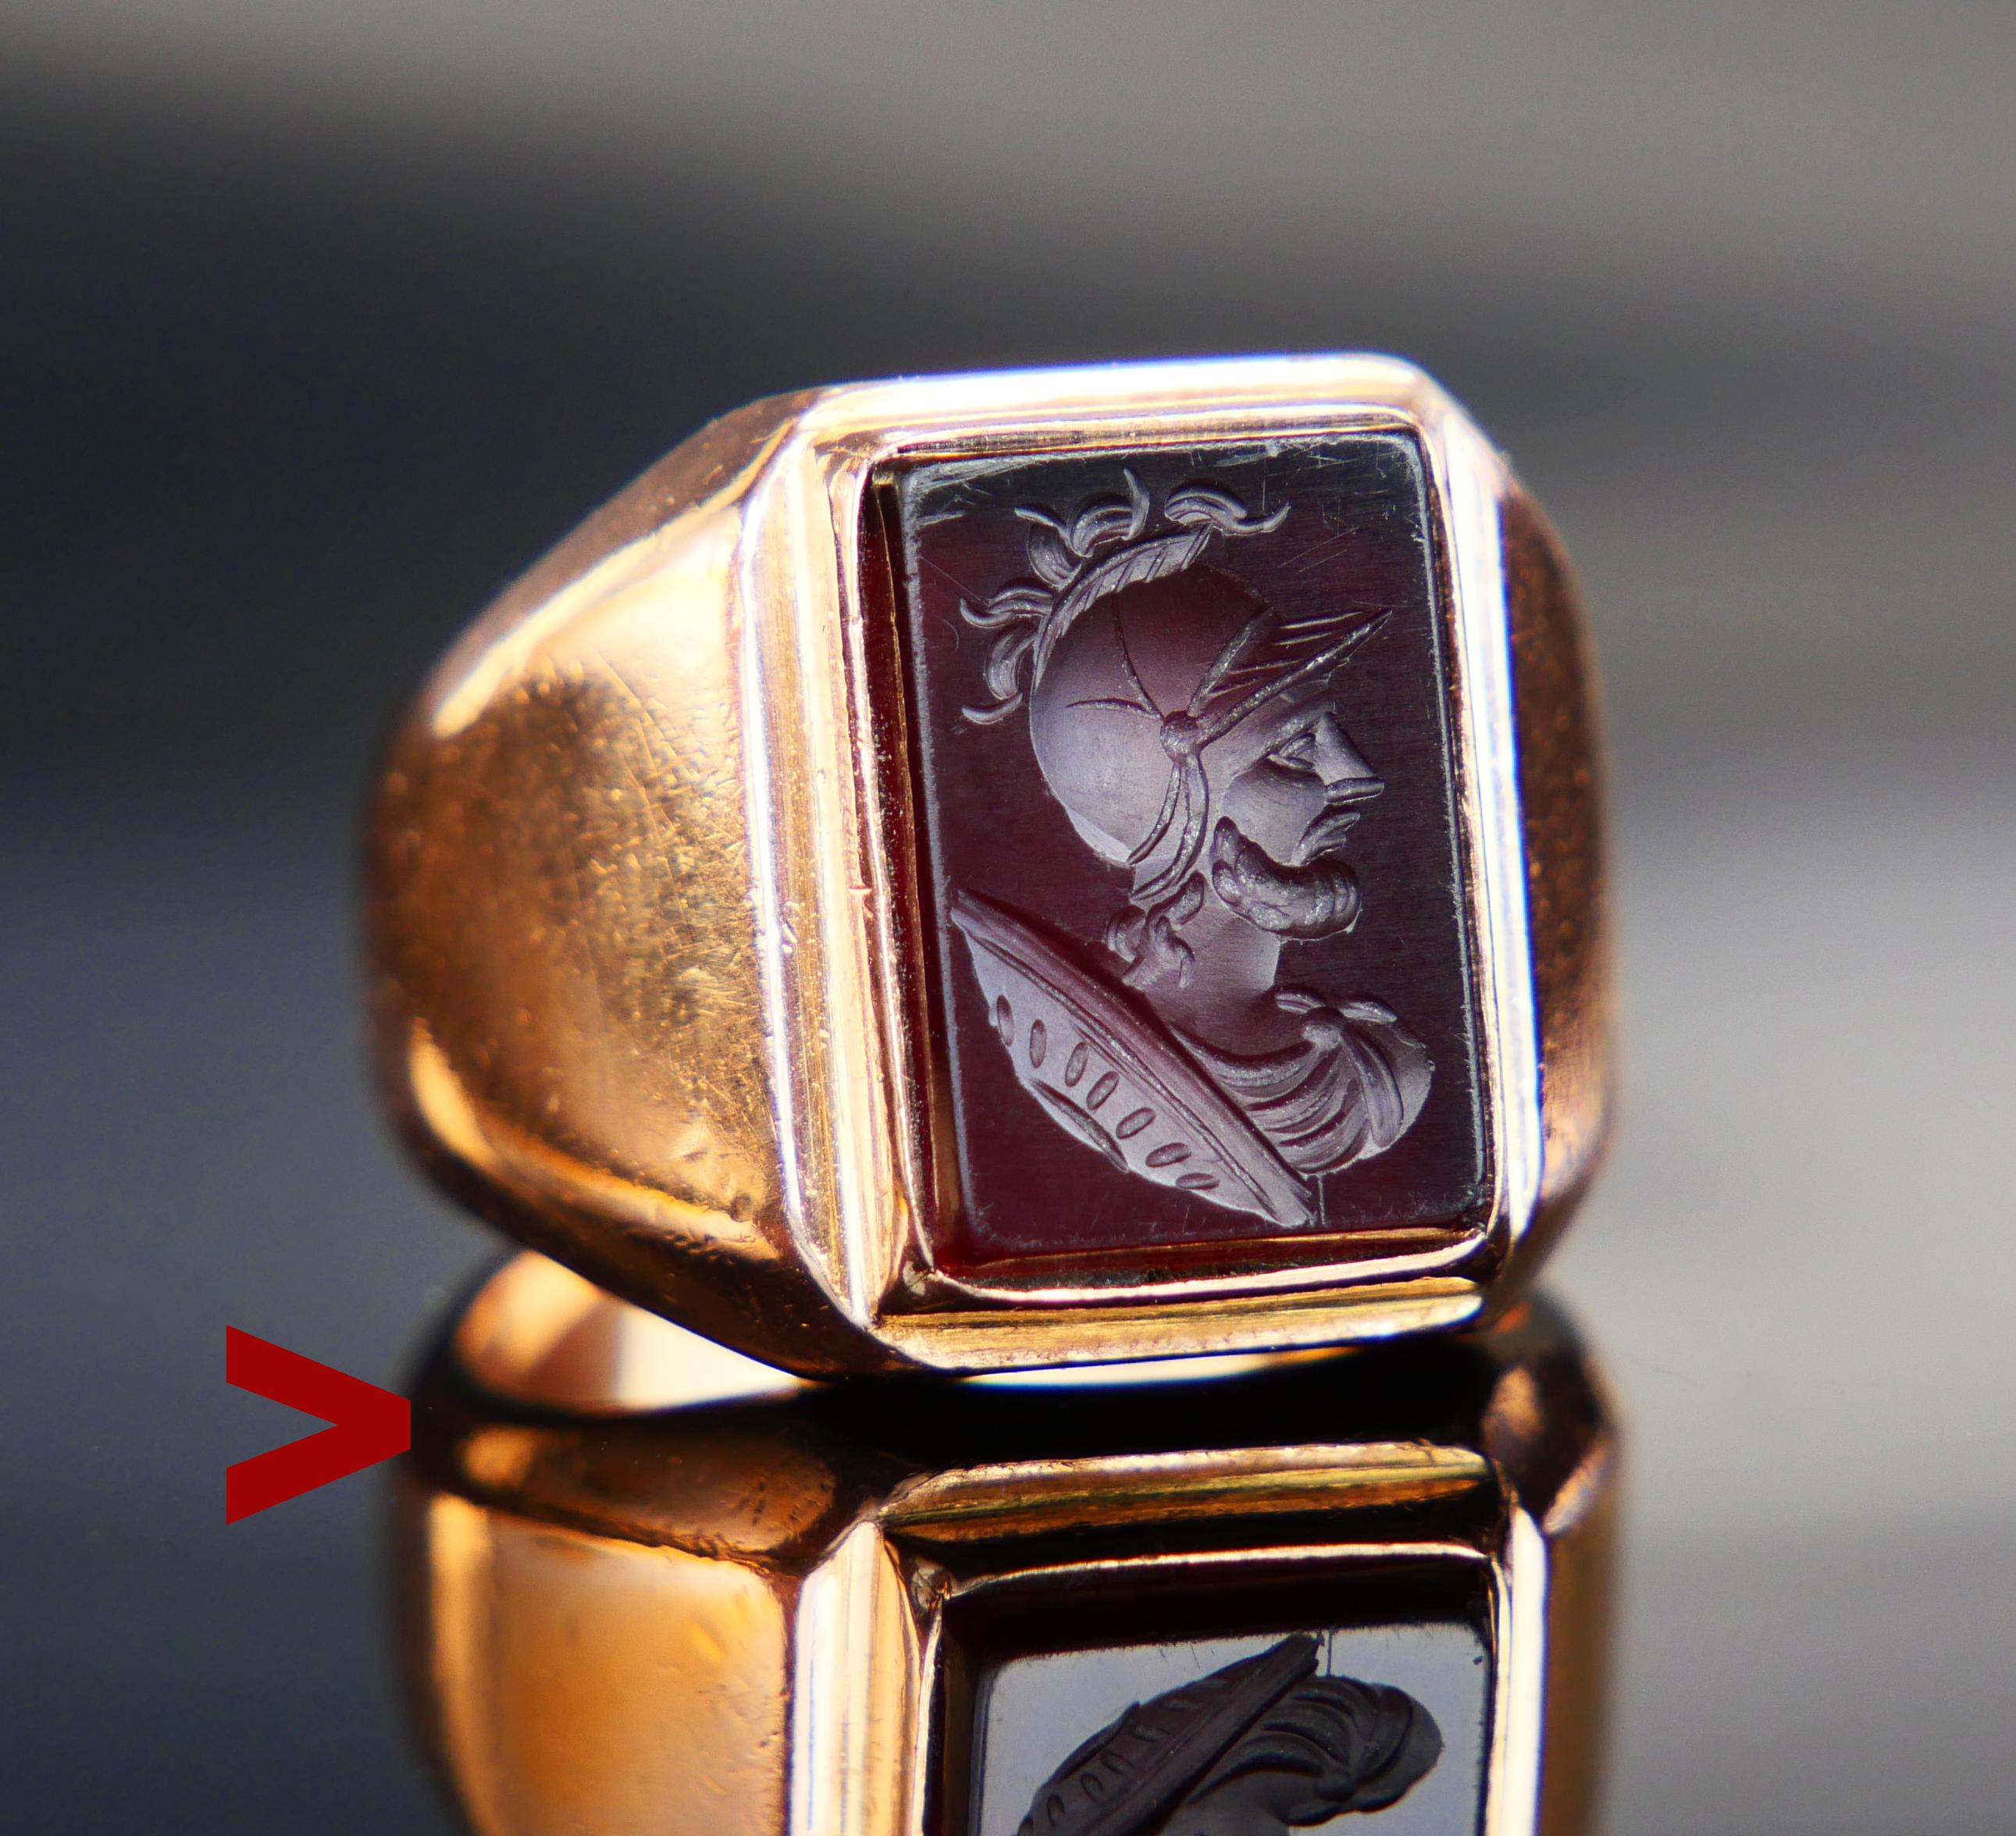 Signet Intaglio Ring in solid 18K Orange / Rose / Red Gold with bezel set fine intaglio on Red Onyx depicting Greek Ares (Roman Mars ) - God of War and also an agricultural guardian. Hand - carved with great accuracy and attention to detail on solid